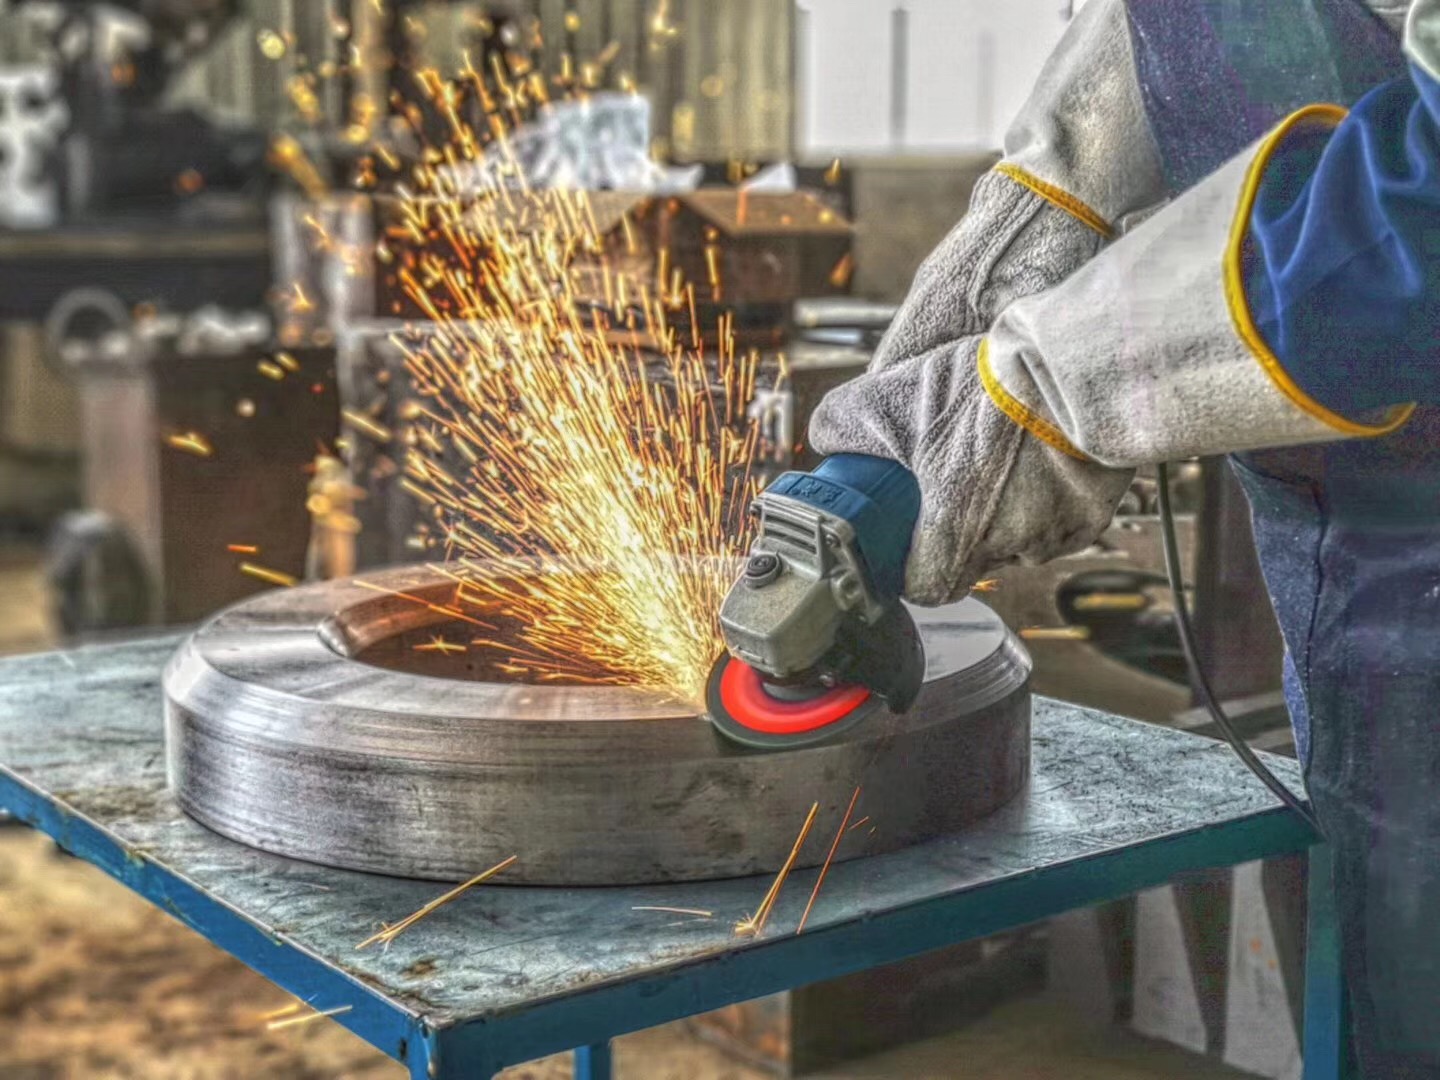 Safe use and precautions for the grinding wheel